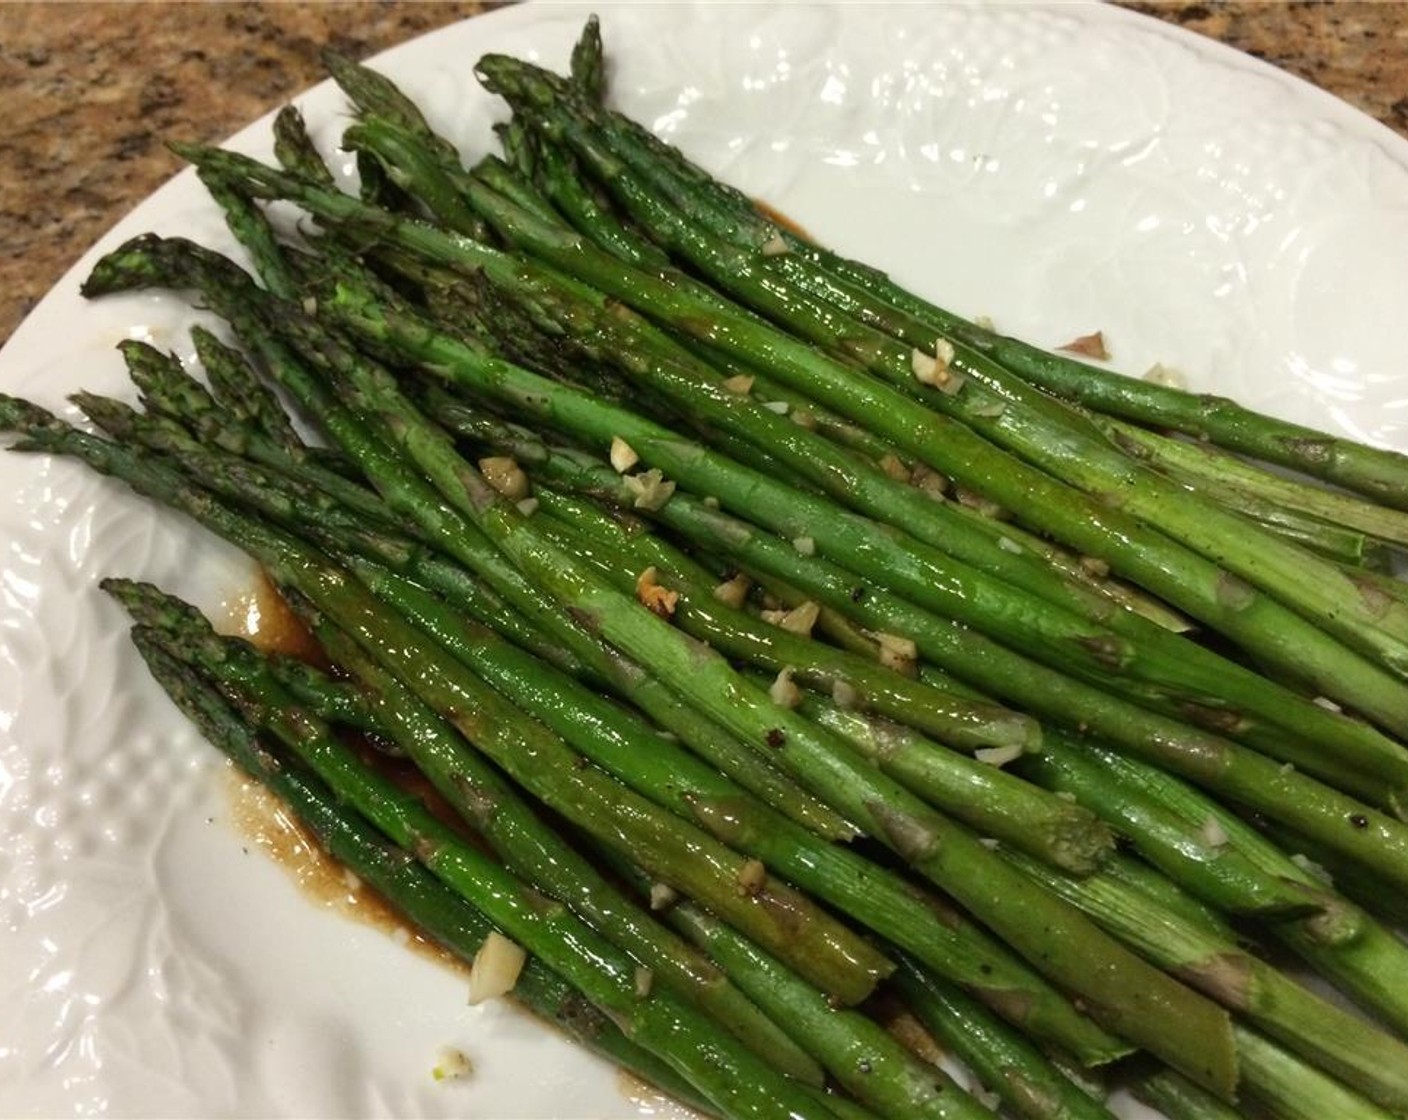 step 4 When ready to serve, pour the sauce over the asparagus and serve.